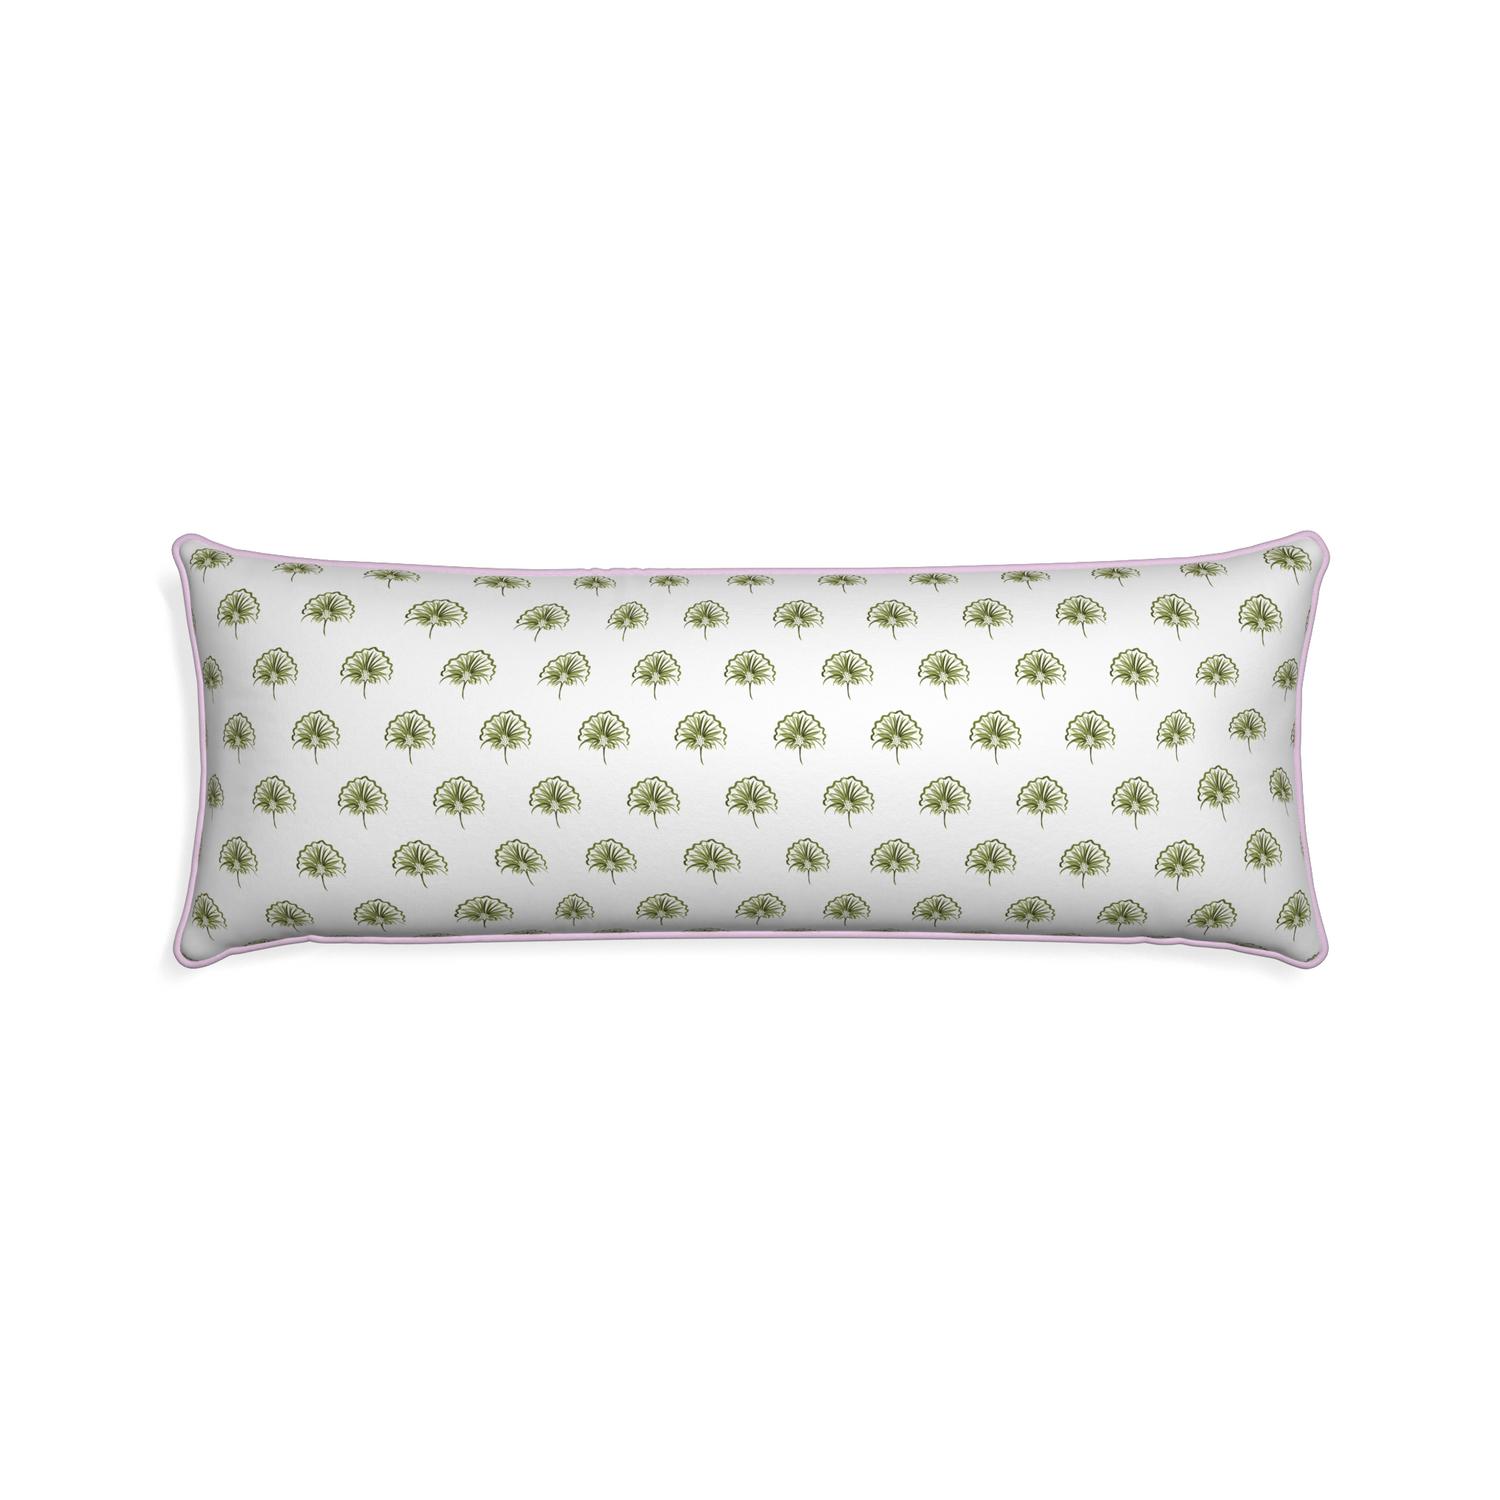 Xl-lumbar penelope moss custom green floralpillow with l piping on white background